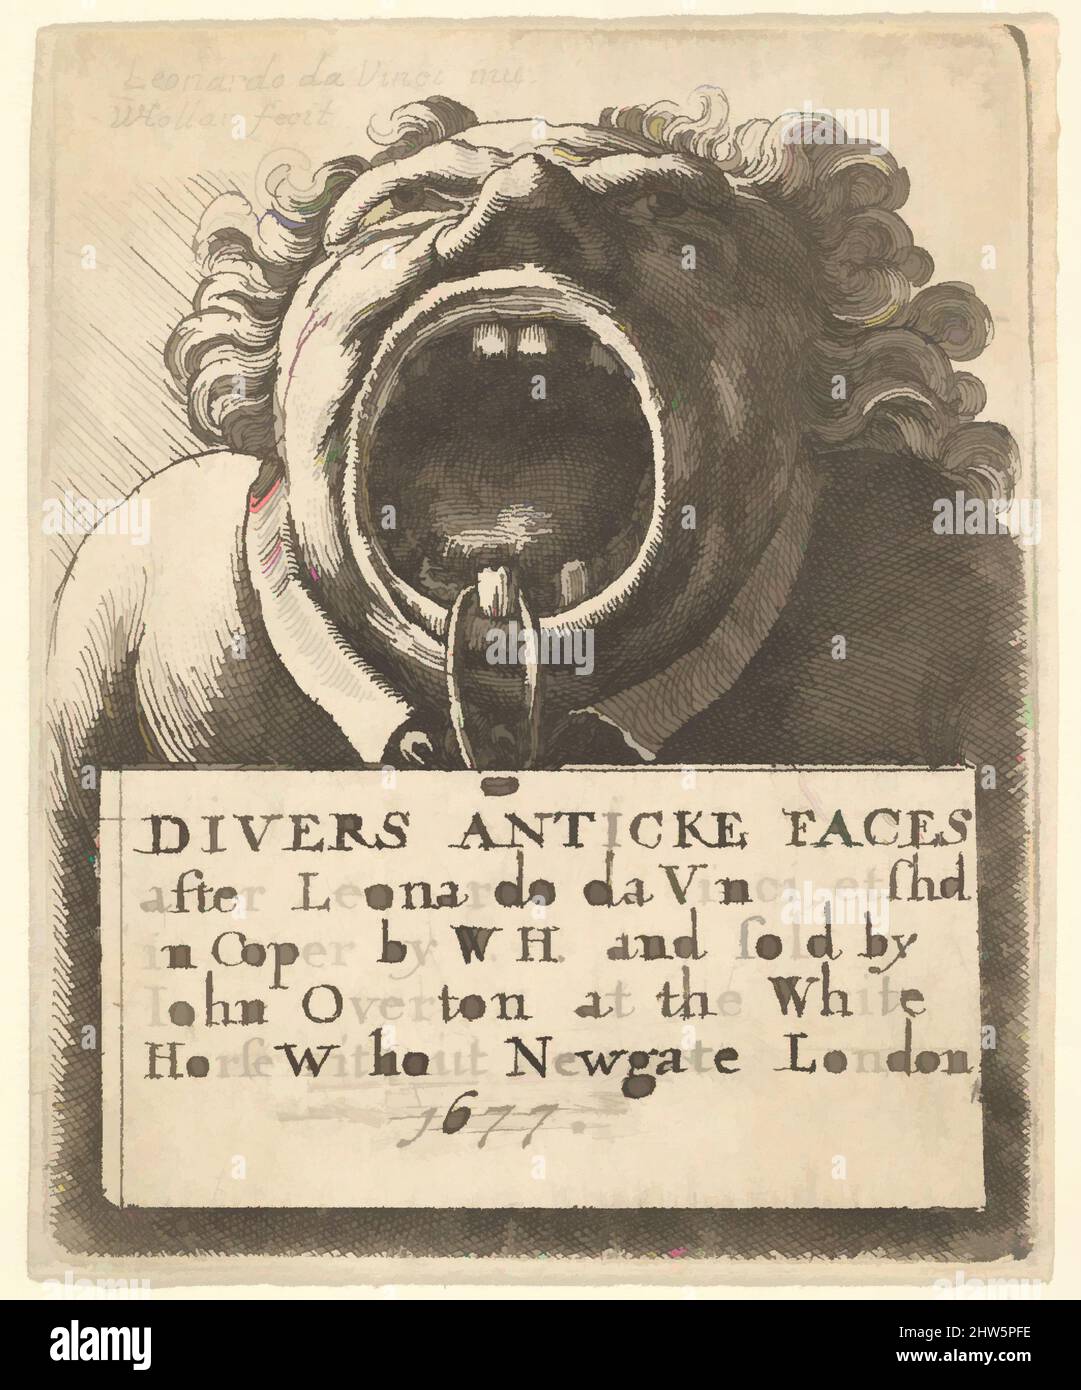 Art inspired by Title Page, Divers Anticke Faces, 1677, Etching; second state of two (NH), Plate: 2 5/8 × 2 3/16 in. (6.7 × 5.5 cm), Prints, After Leonardo da Vinci (Italian, Vinci 1452–1519 Amboise), Title-page to 'Divers Anticke Faces', lettered with title on tablet, suspended from a, Classic works modernized by Artotop with a splash of modernity. Shapes, color and value, eye-catching visual impact on art. Emotions through freedom of artworks in a contemporary way. A timeless message pursuing a wildly creative new direction. Artists turning to the digital medium and creating the Artotop NFT Stock Photo